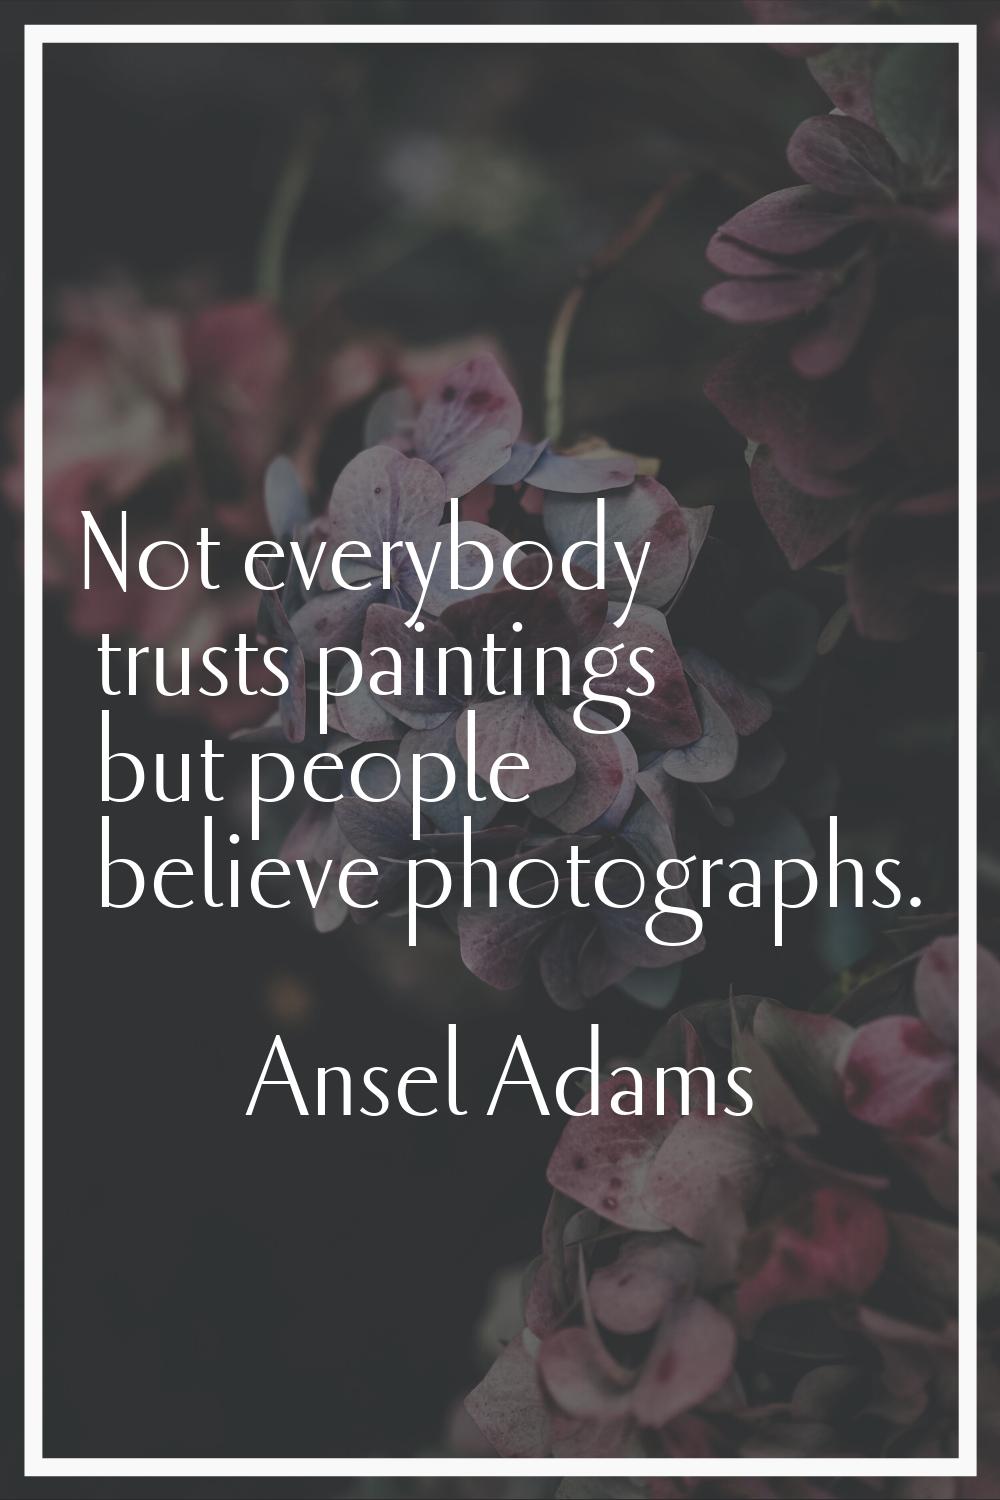 Not everybody trusts paintings but people believe photographs.